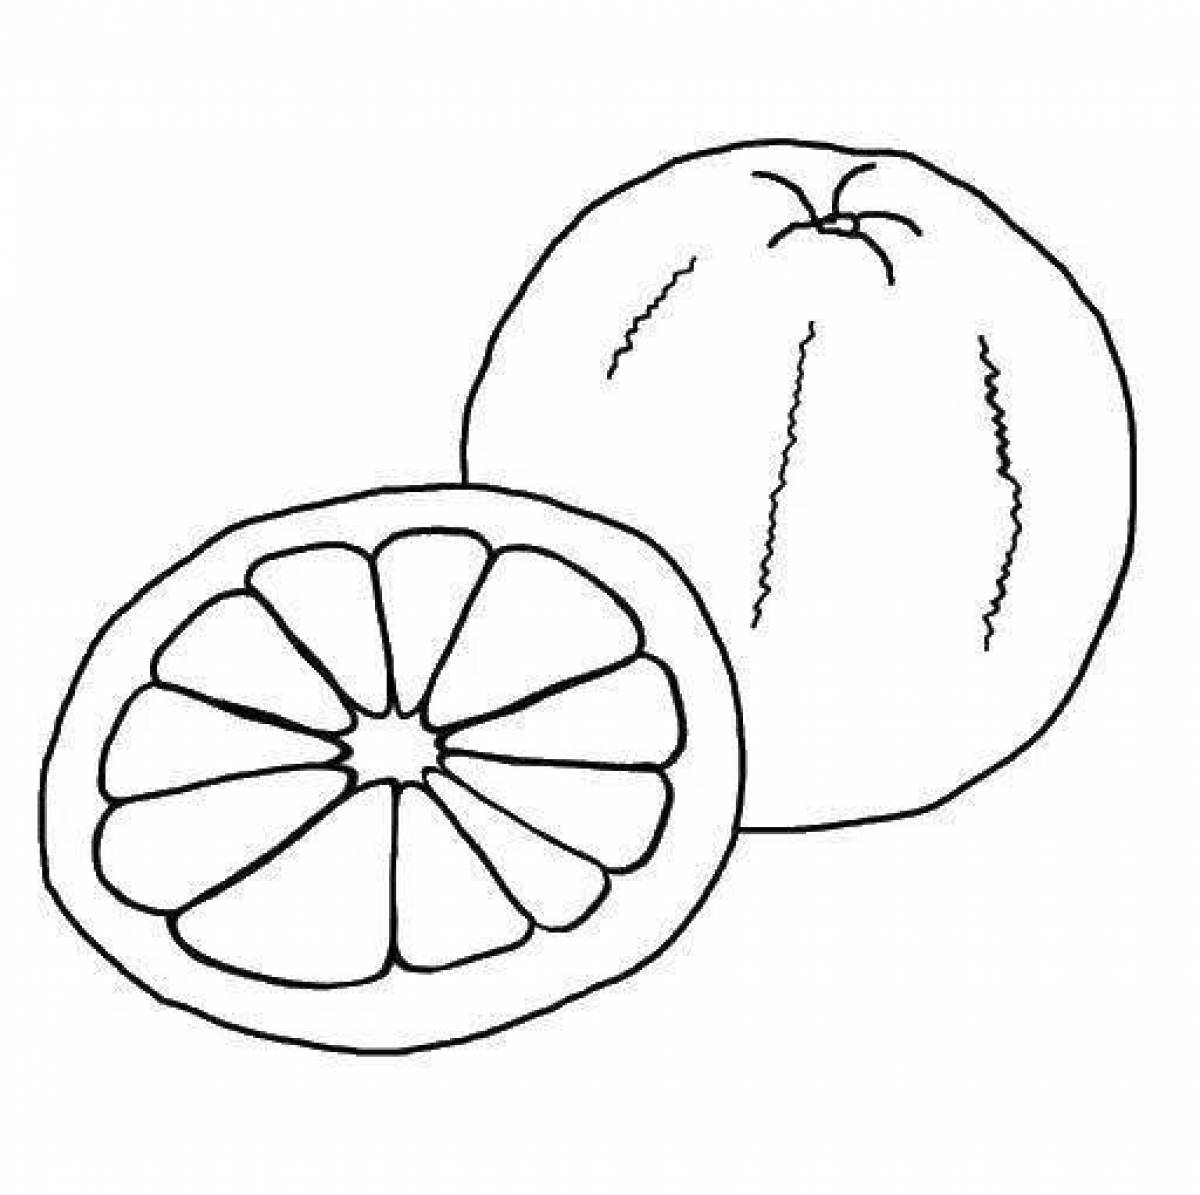 Coloring page cheerful grapefruit